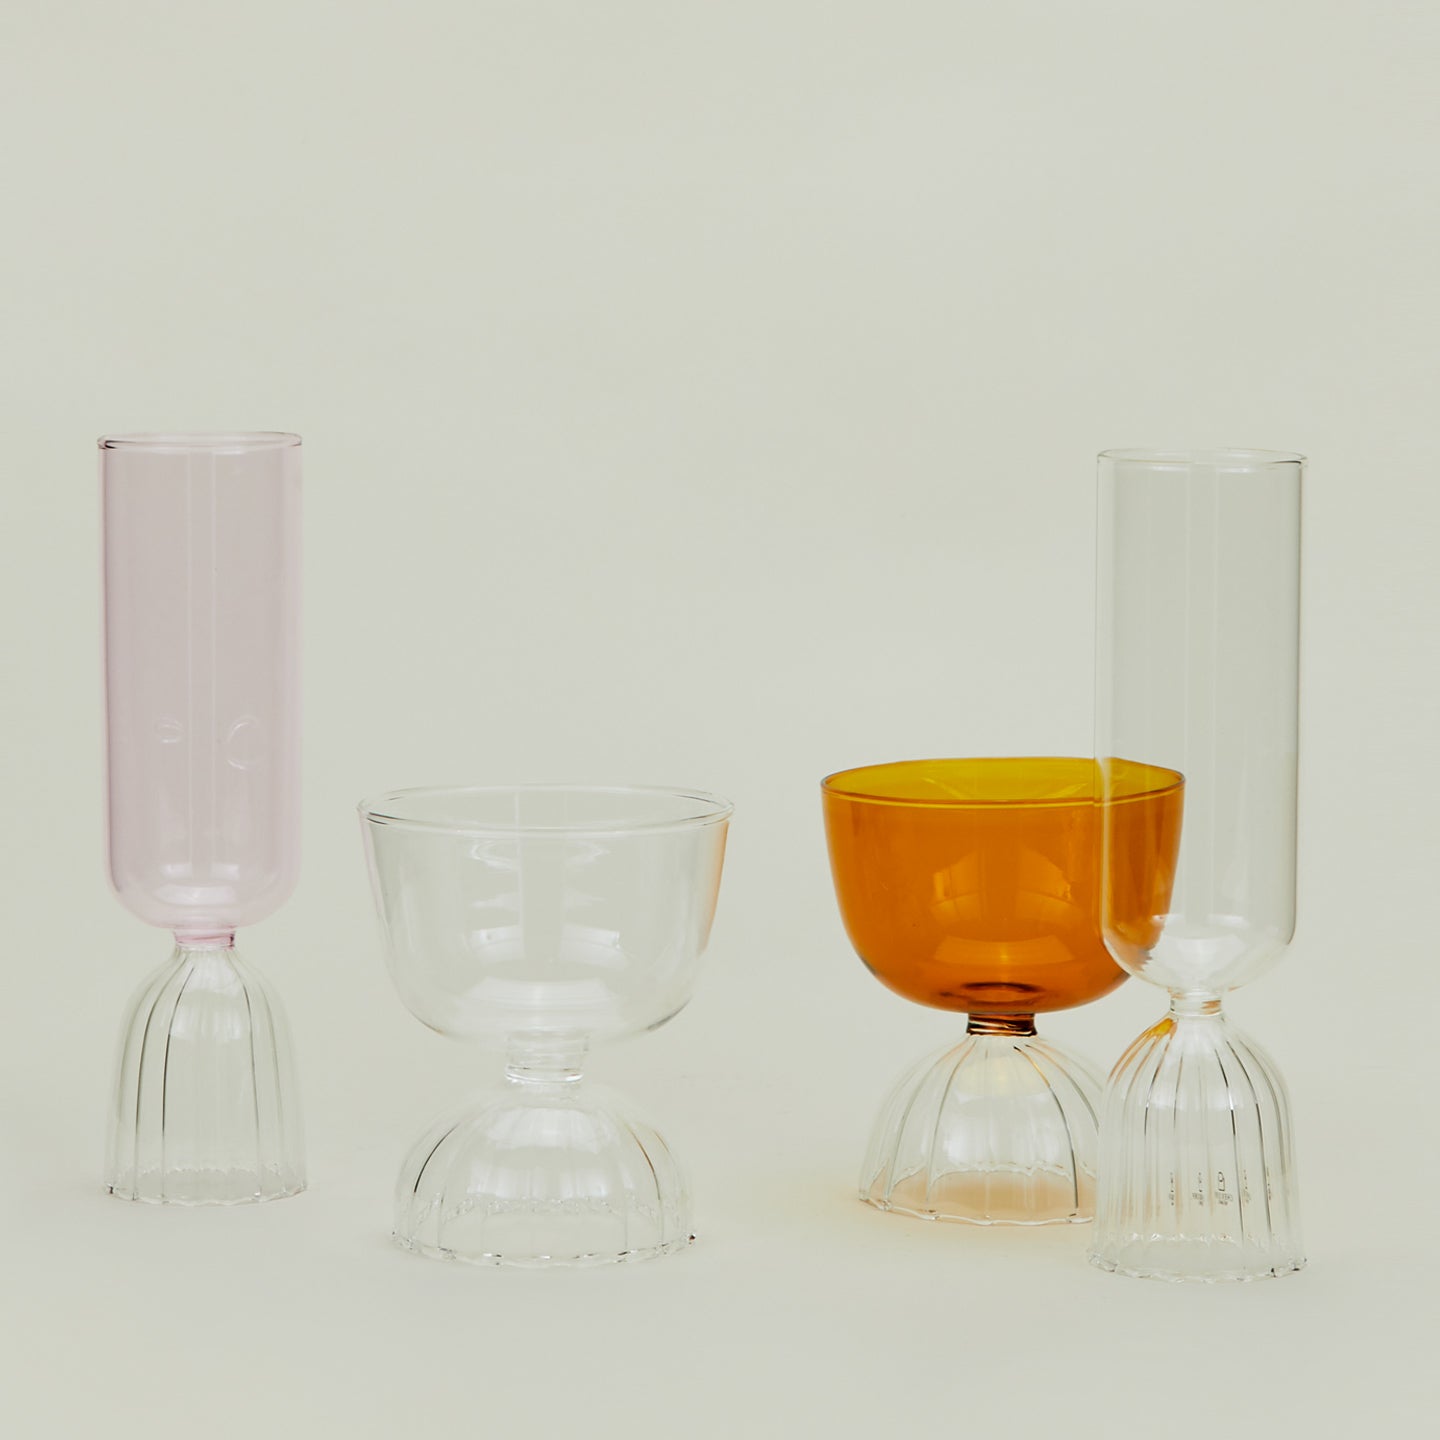 Group of Tutu glassware in various sizes and colors.